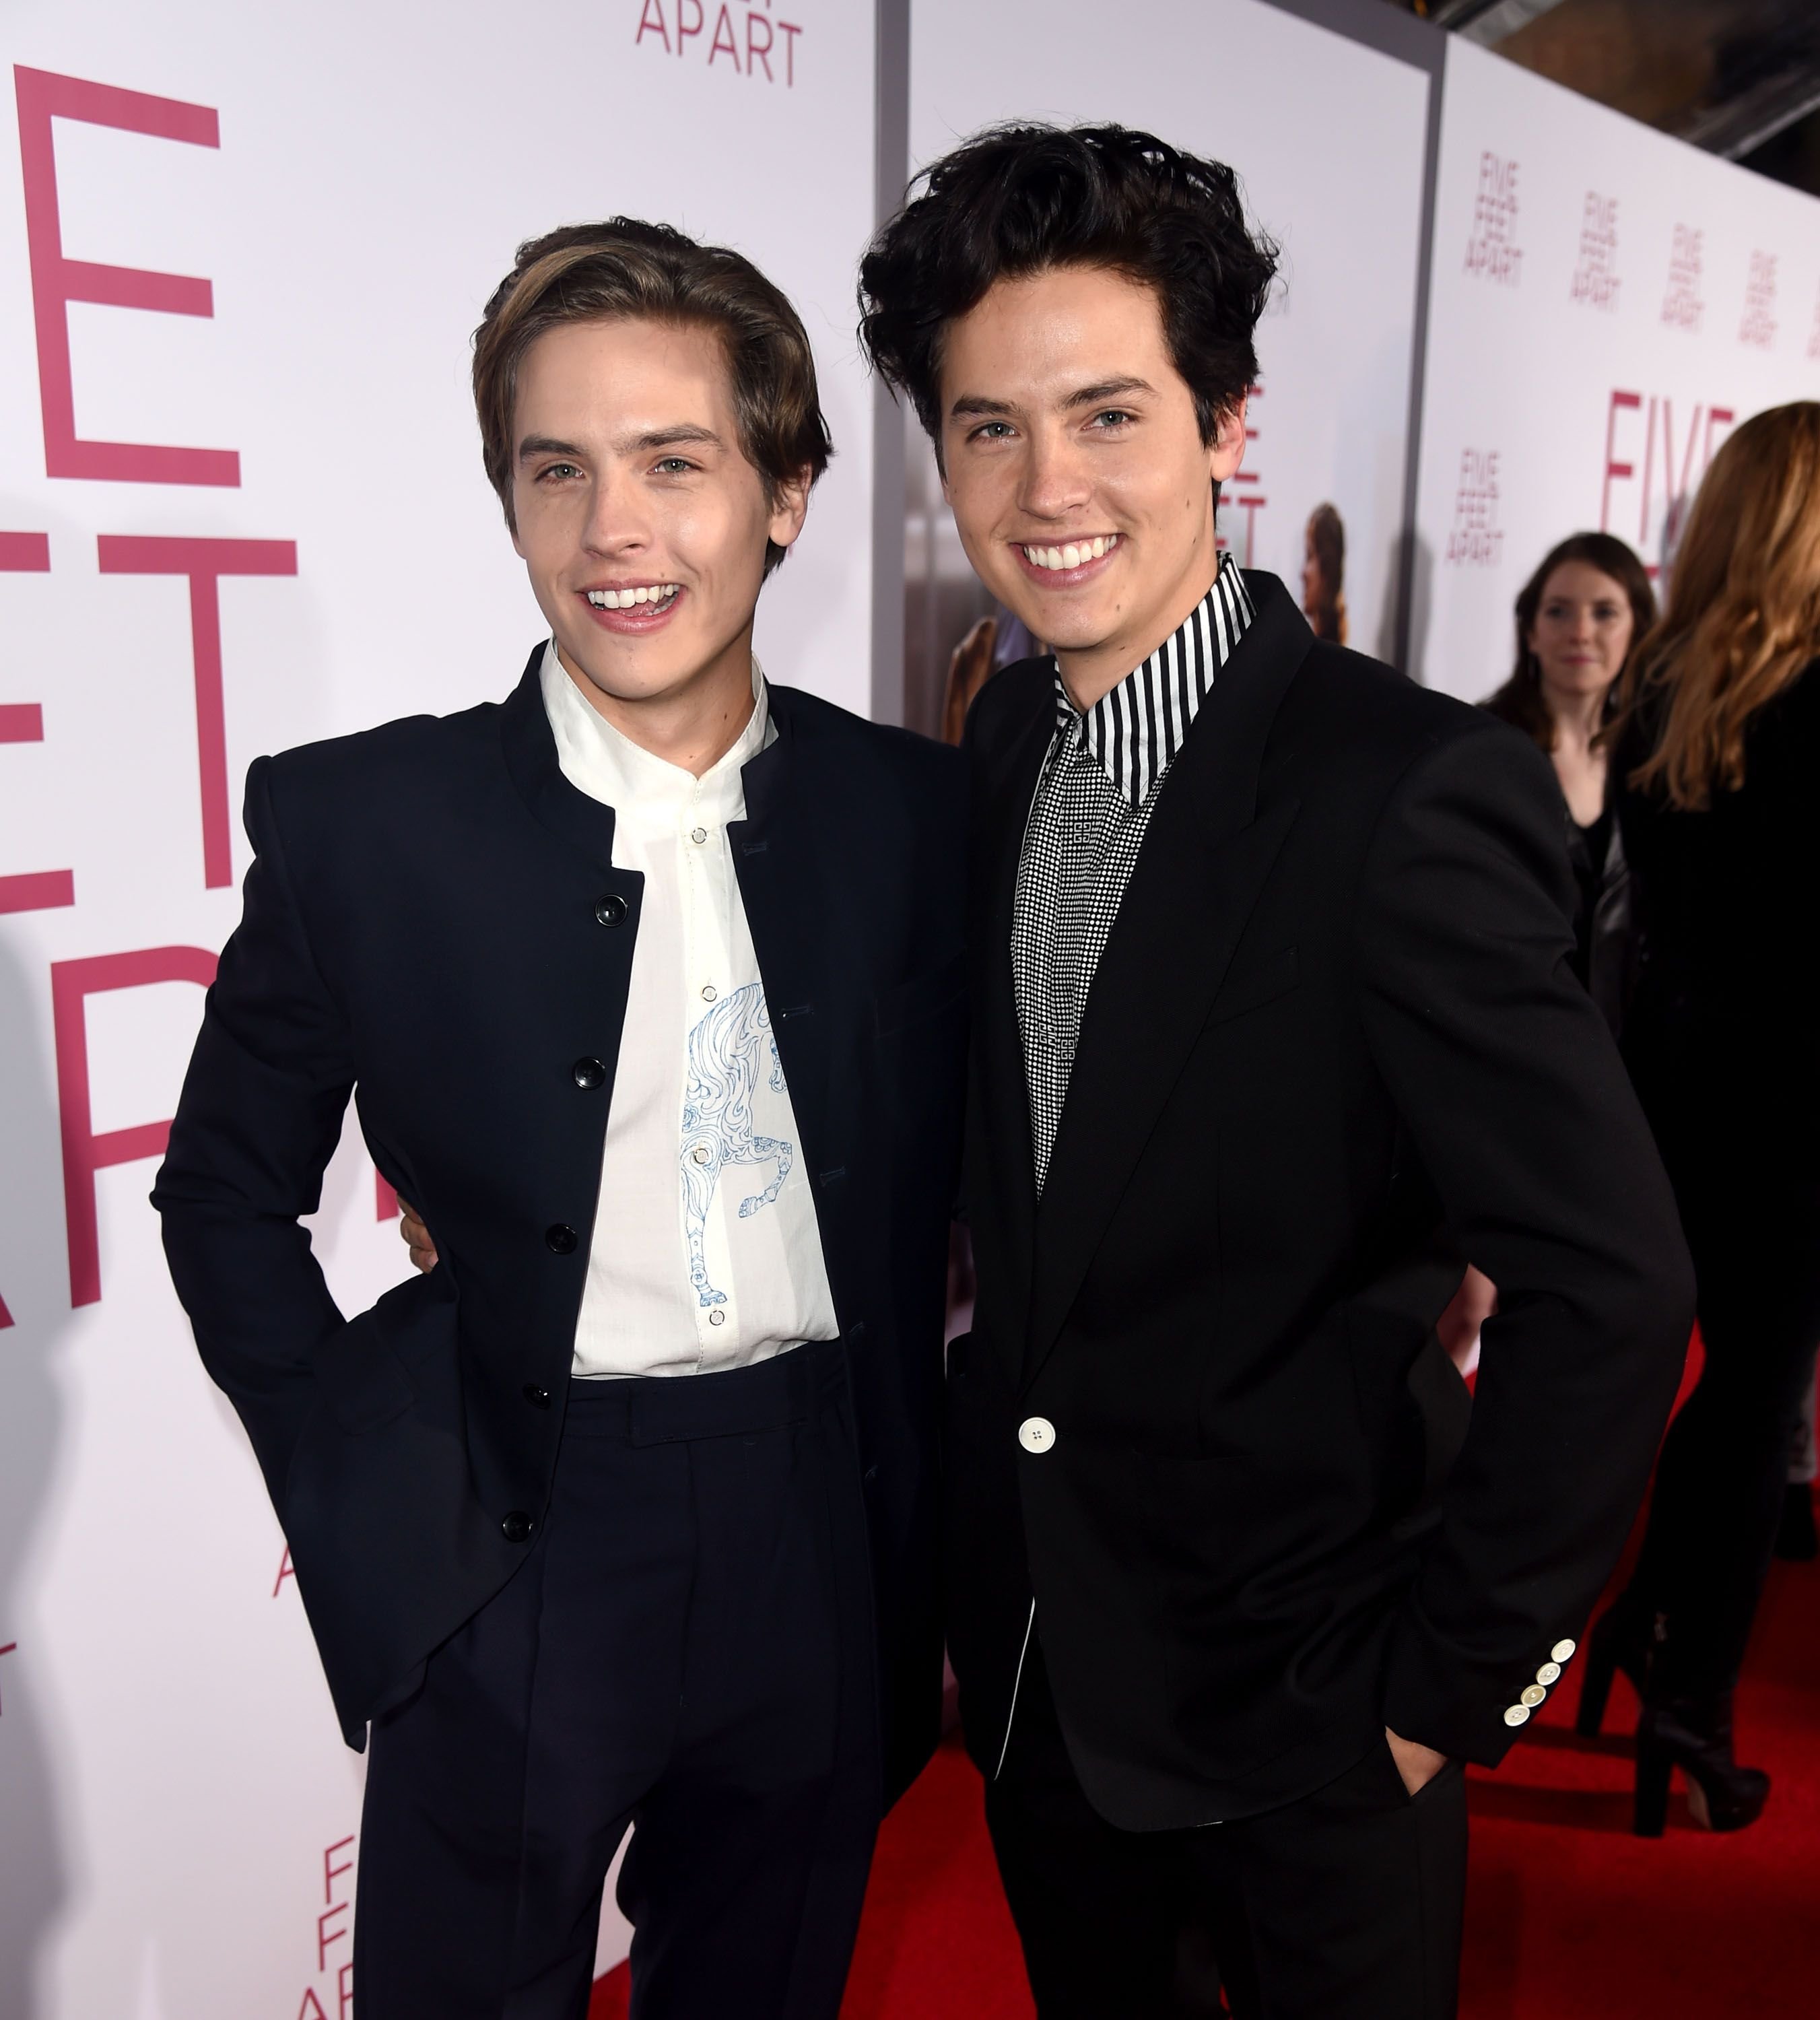 Dylan Sprouse and Cole Sprouse at the premiere of "Five Feet Apart" in March 2019 in Los Angeles | Source: Getty Images